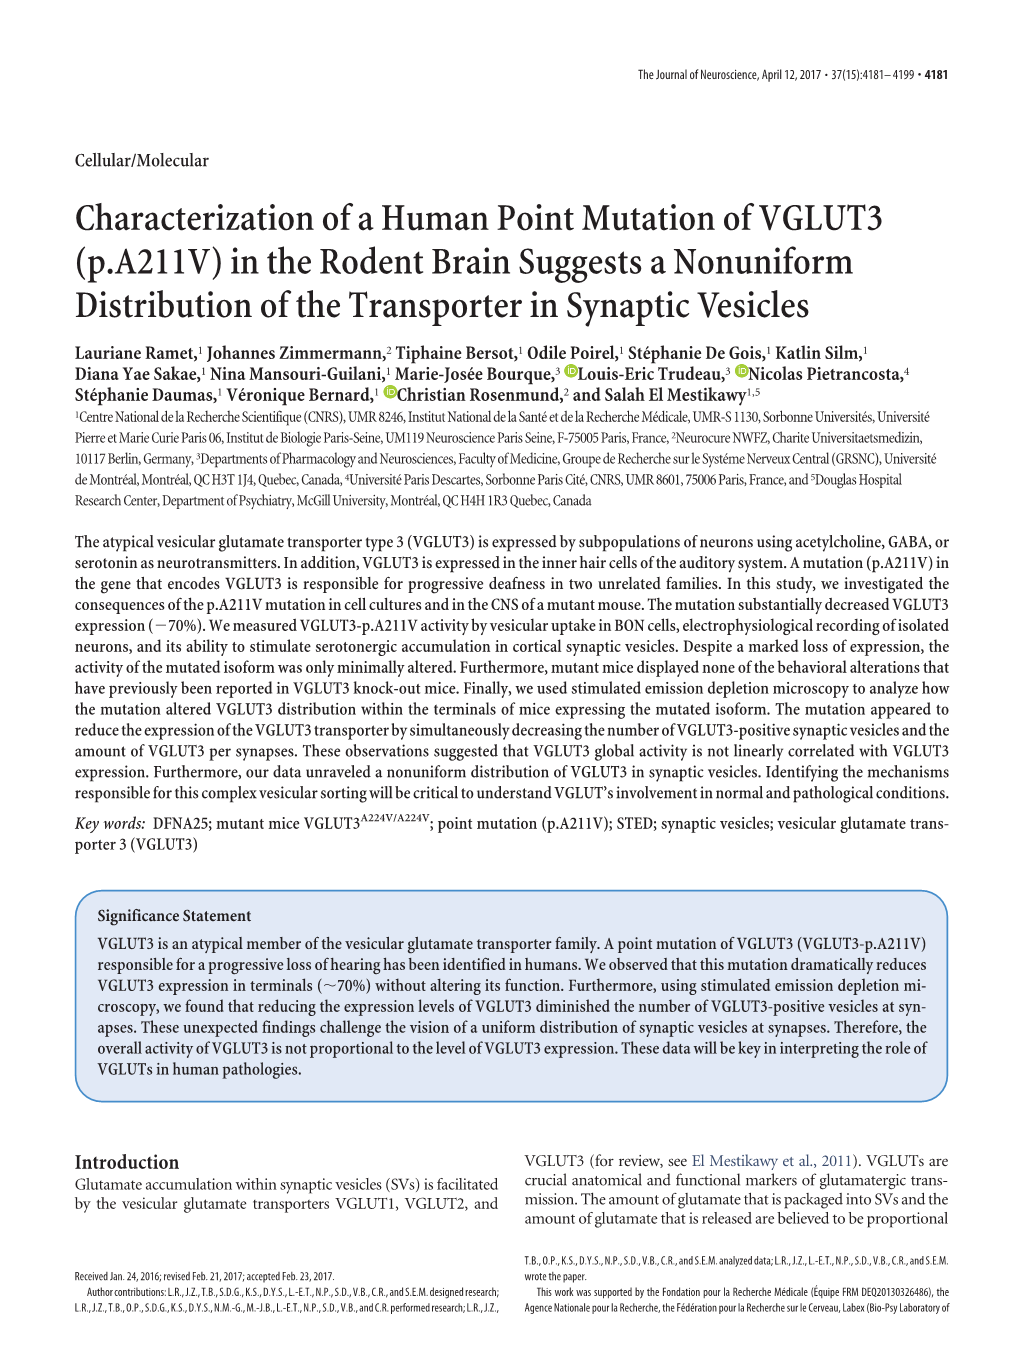 Characterization of a Human Point Mutation of VGLUT3 (P.A211V) in the Rodent Brain Suggests a Nonuniform Distribution of the Transporter in Synaptic Vesicles